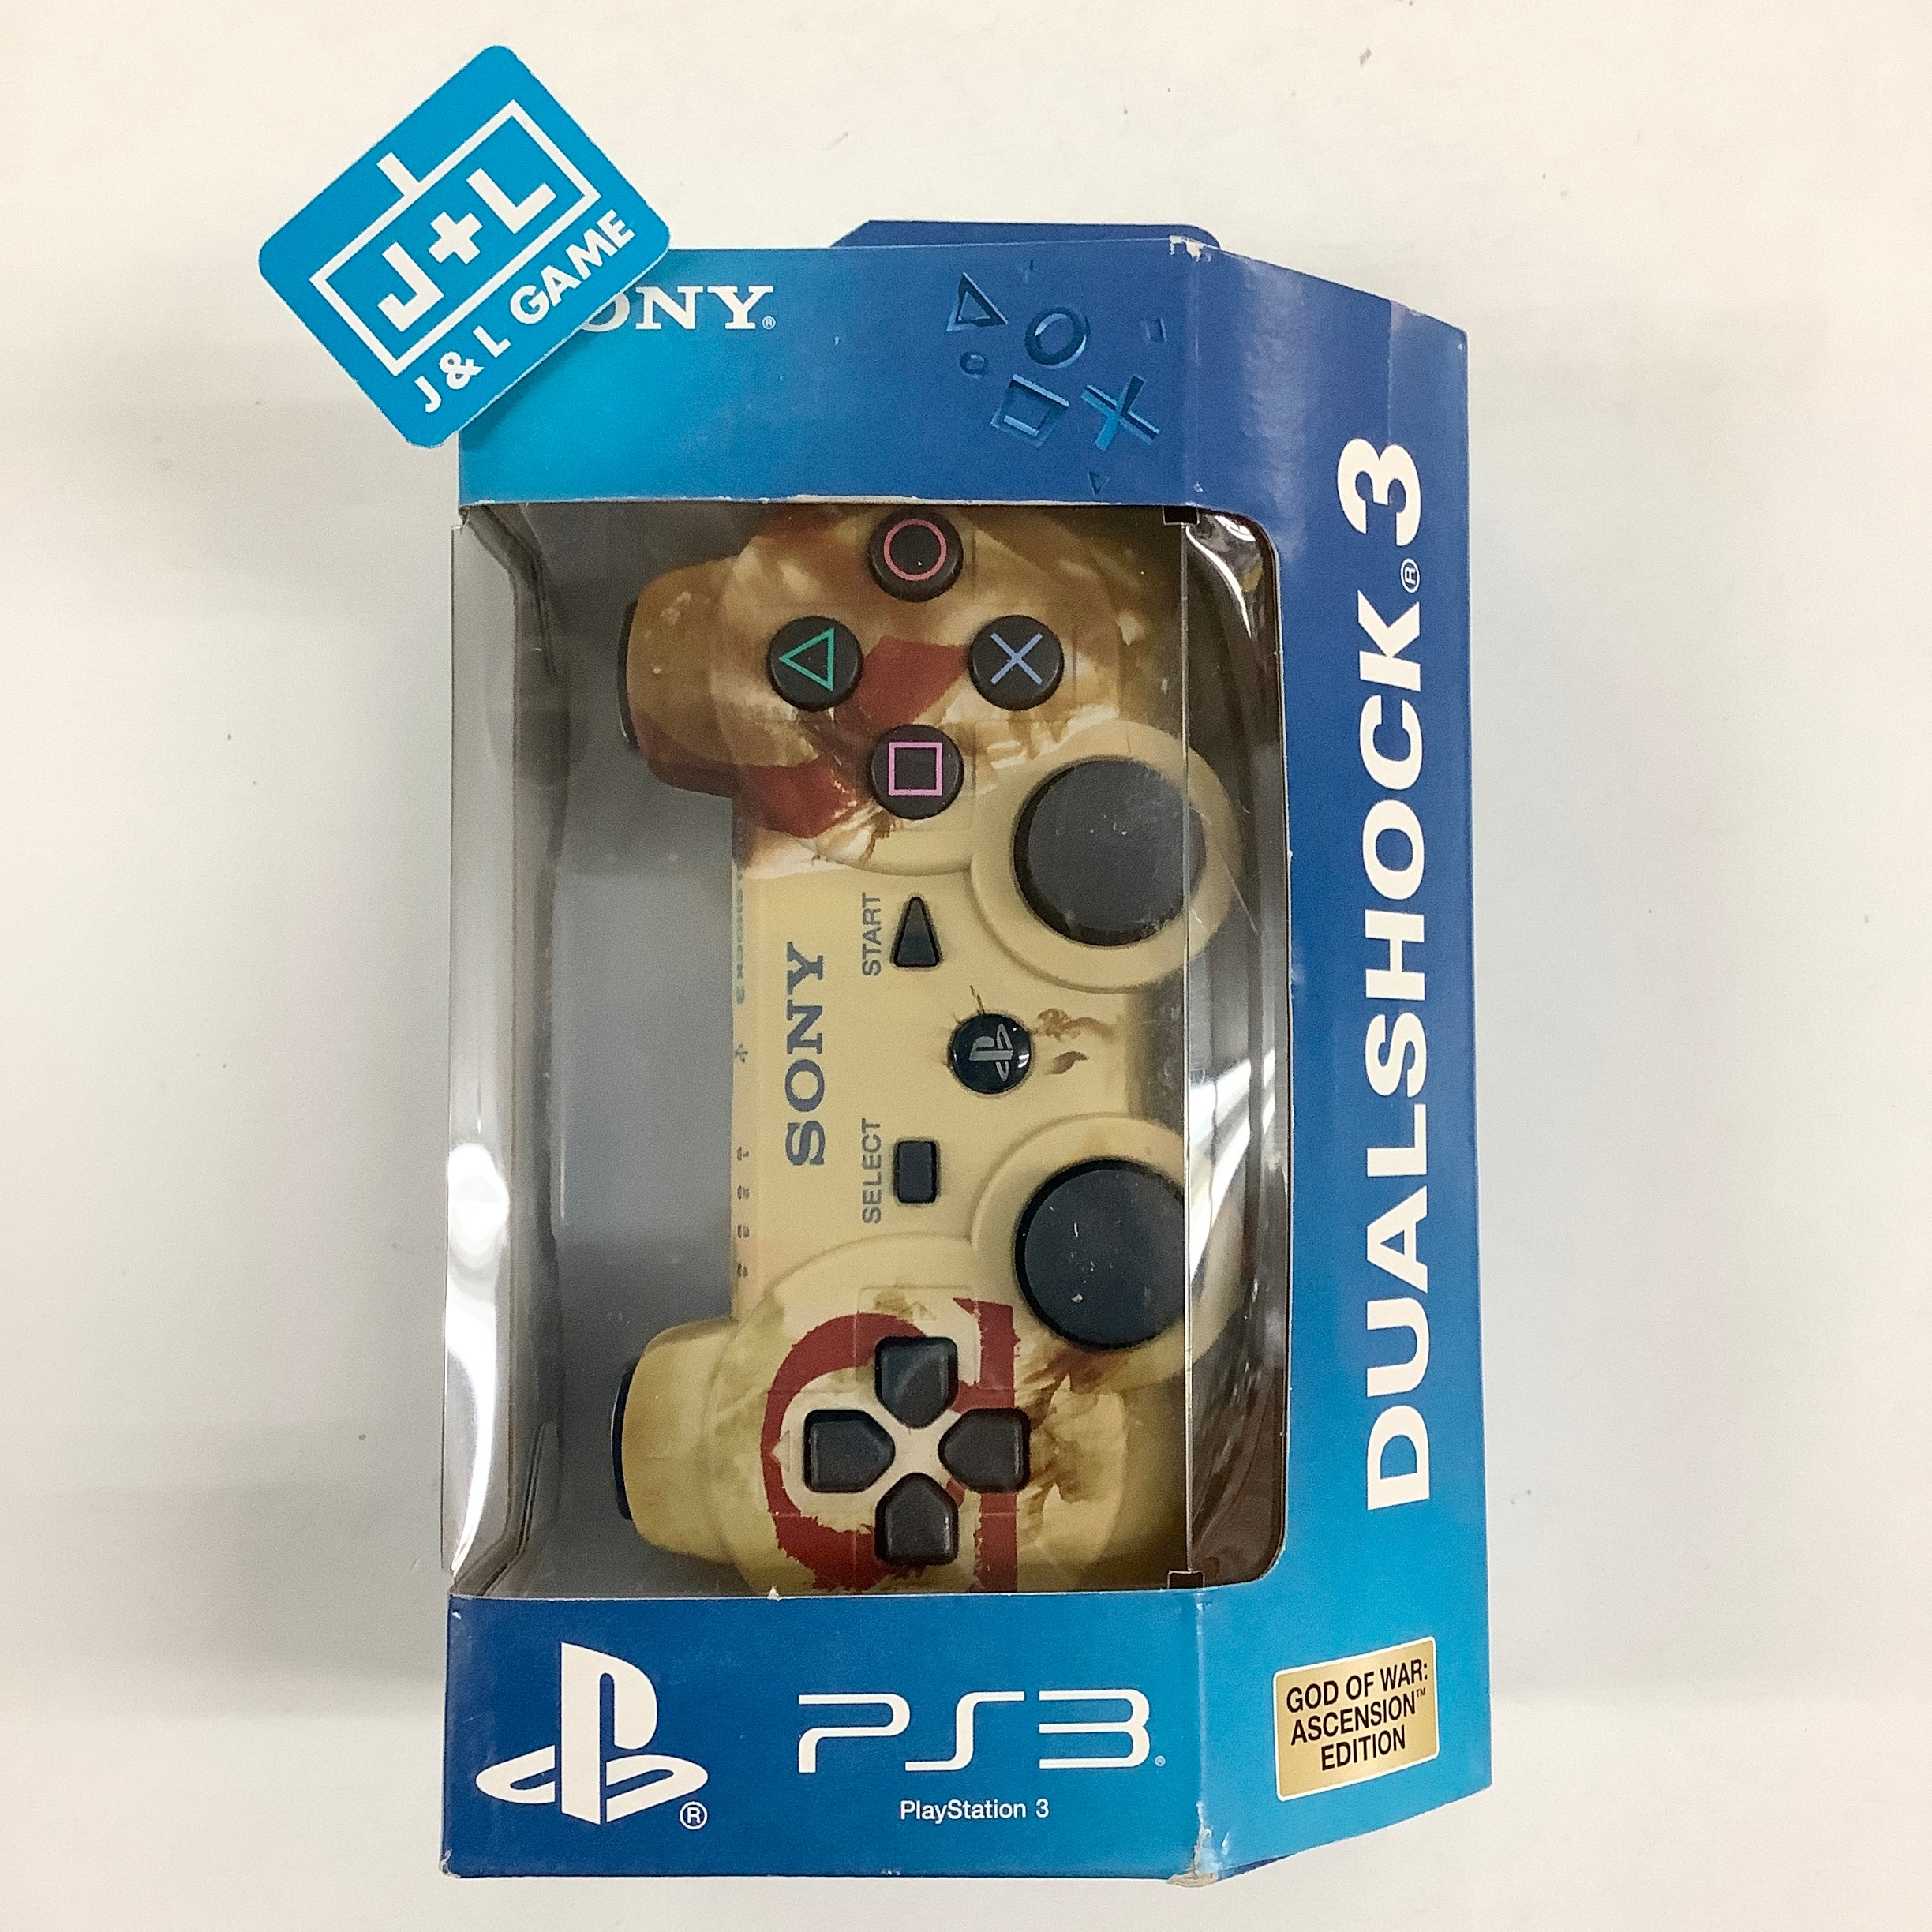 SONY PlayStation 3 DualShock 3 Wireless Controller (God of War: Ascension Edition) - (PS3) PlayStation 3 ( European Import ) Accessories Sony   